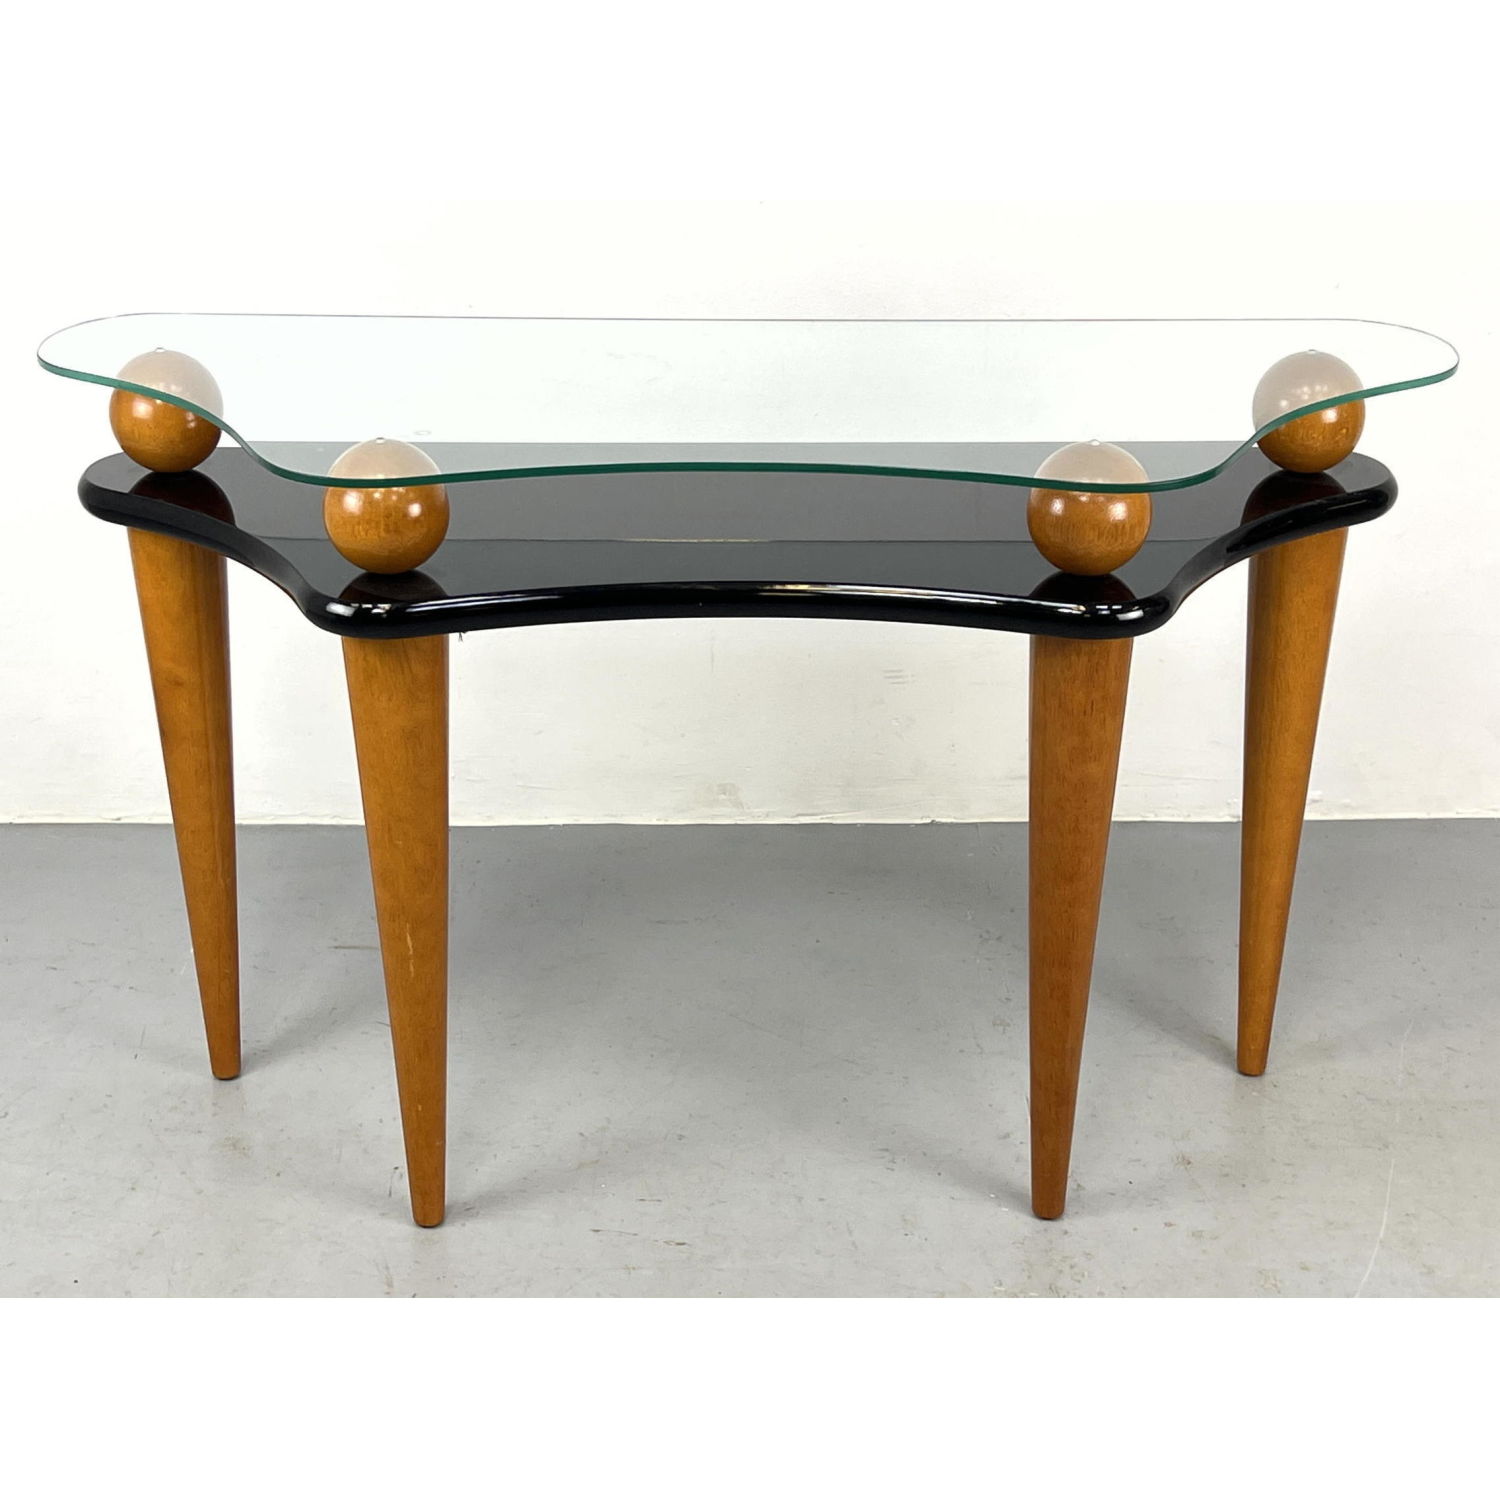 Memphis style Console Hall Table.